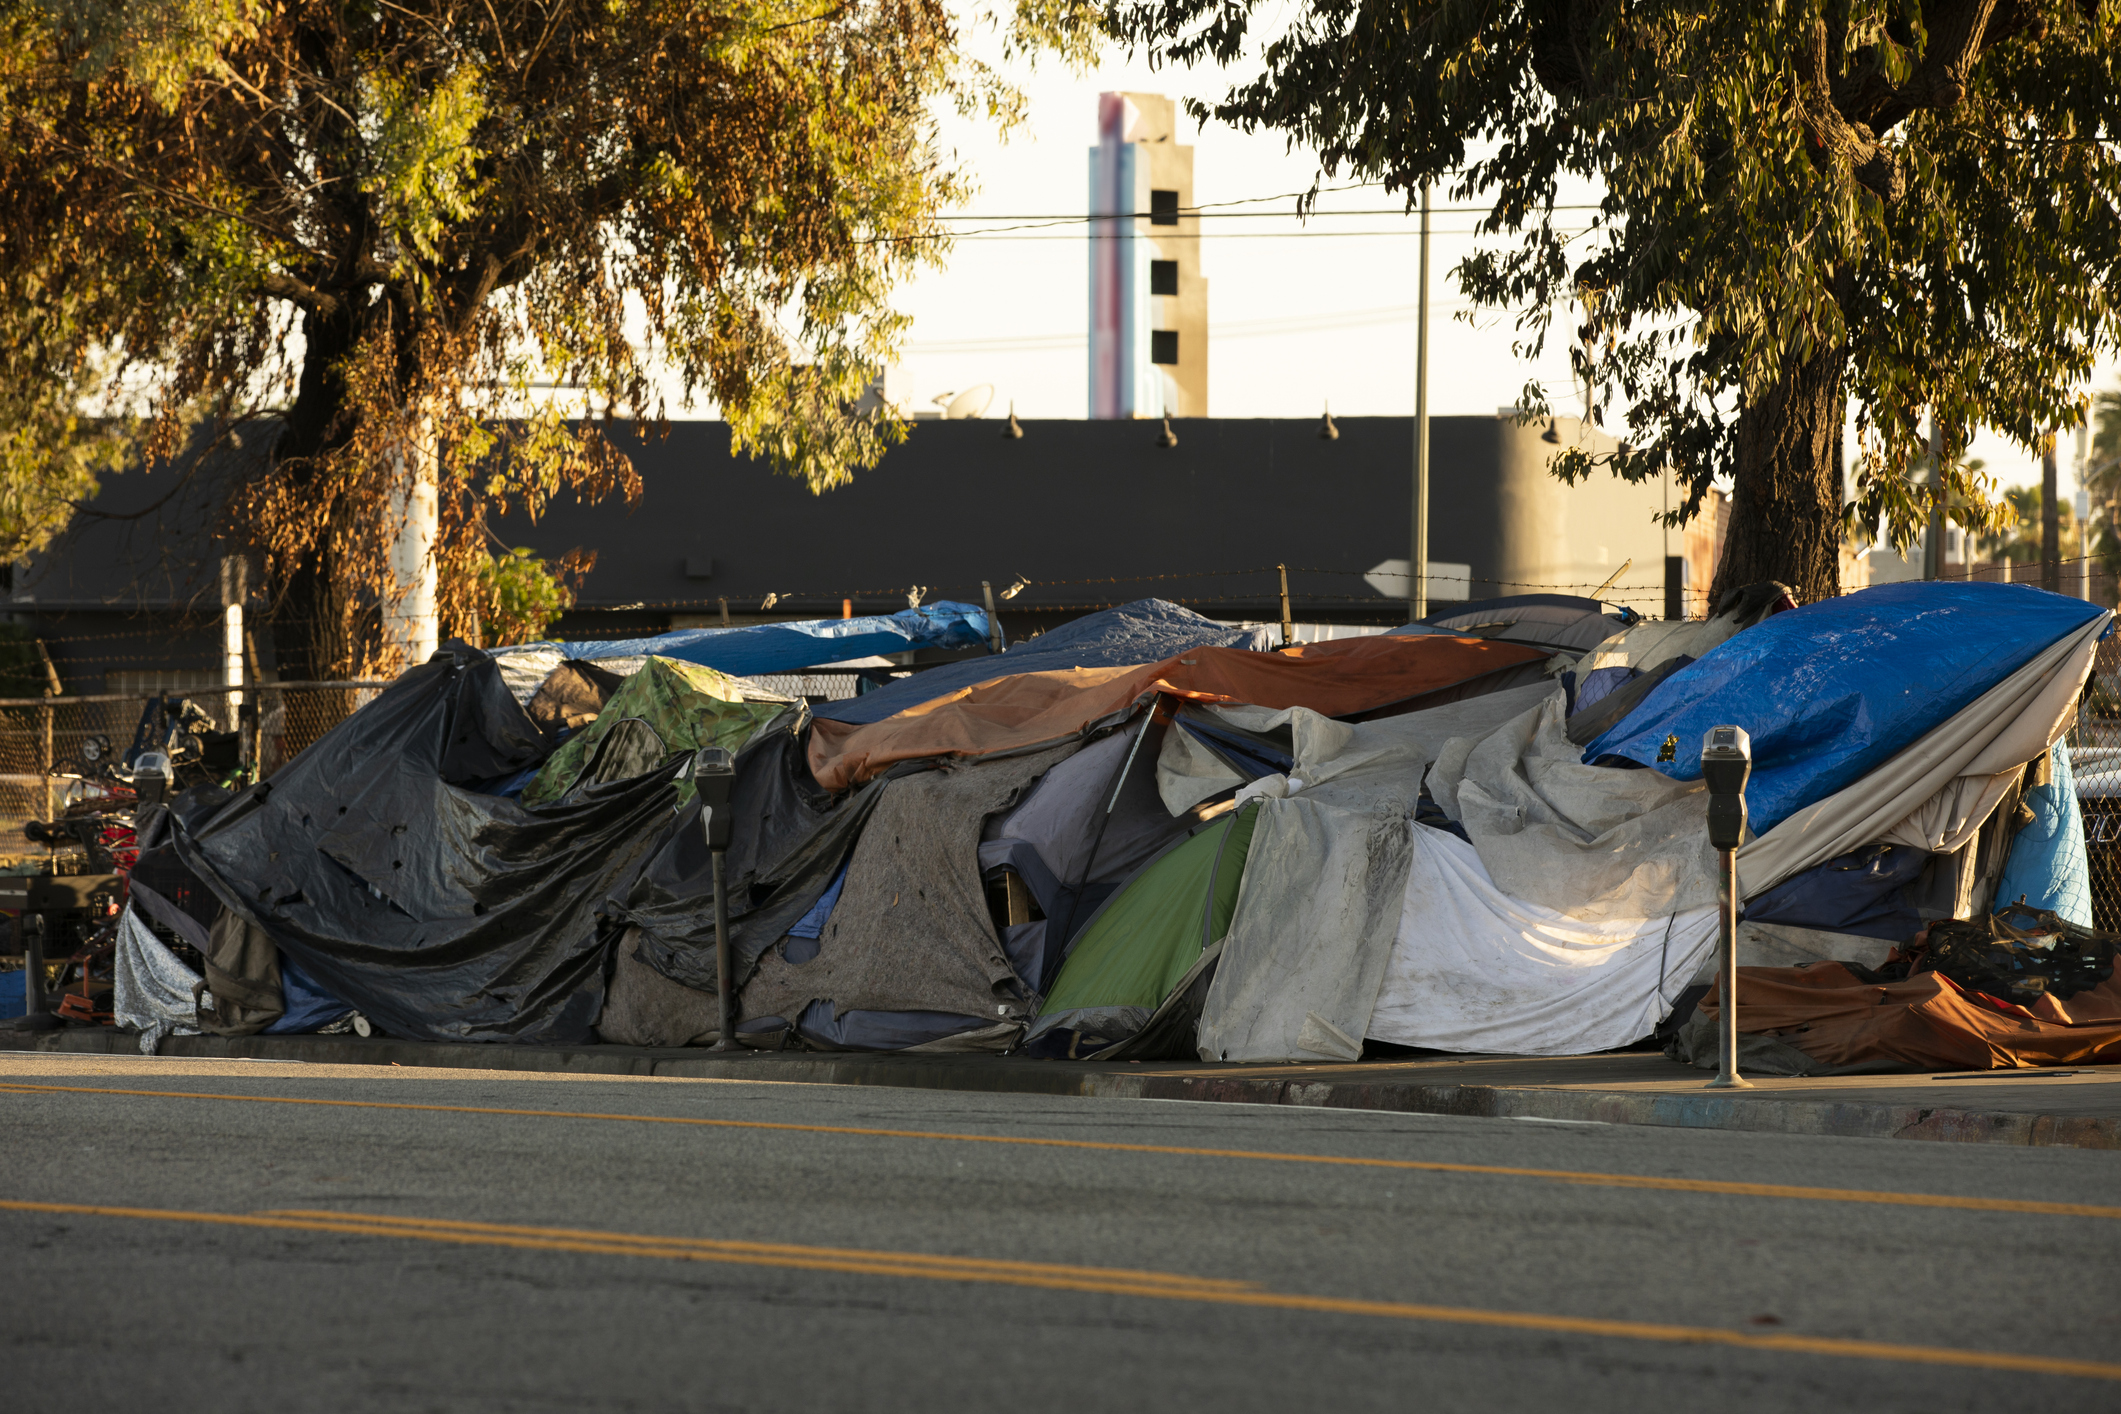 A homeless encampment sits on a street in Downtown Los Angeles, California.